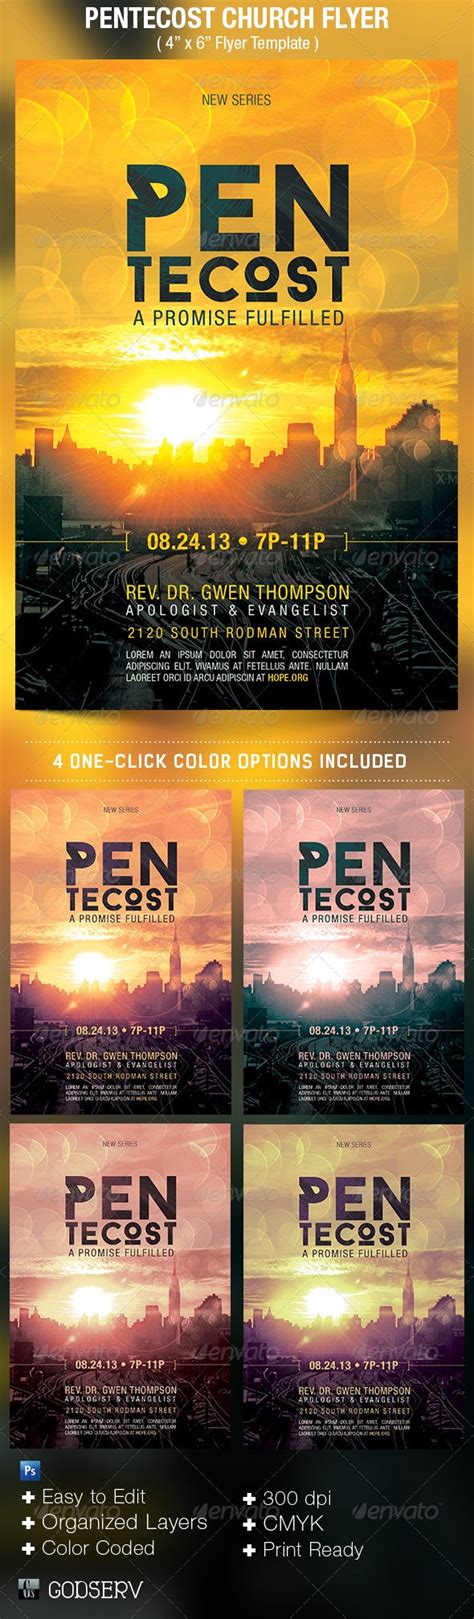 Pentecost Church Flyer Template By Godserv Graphicriver